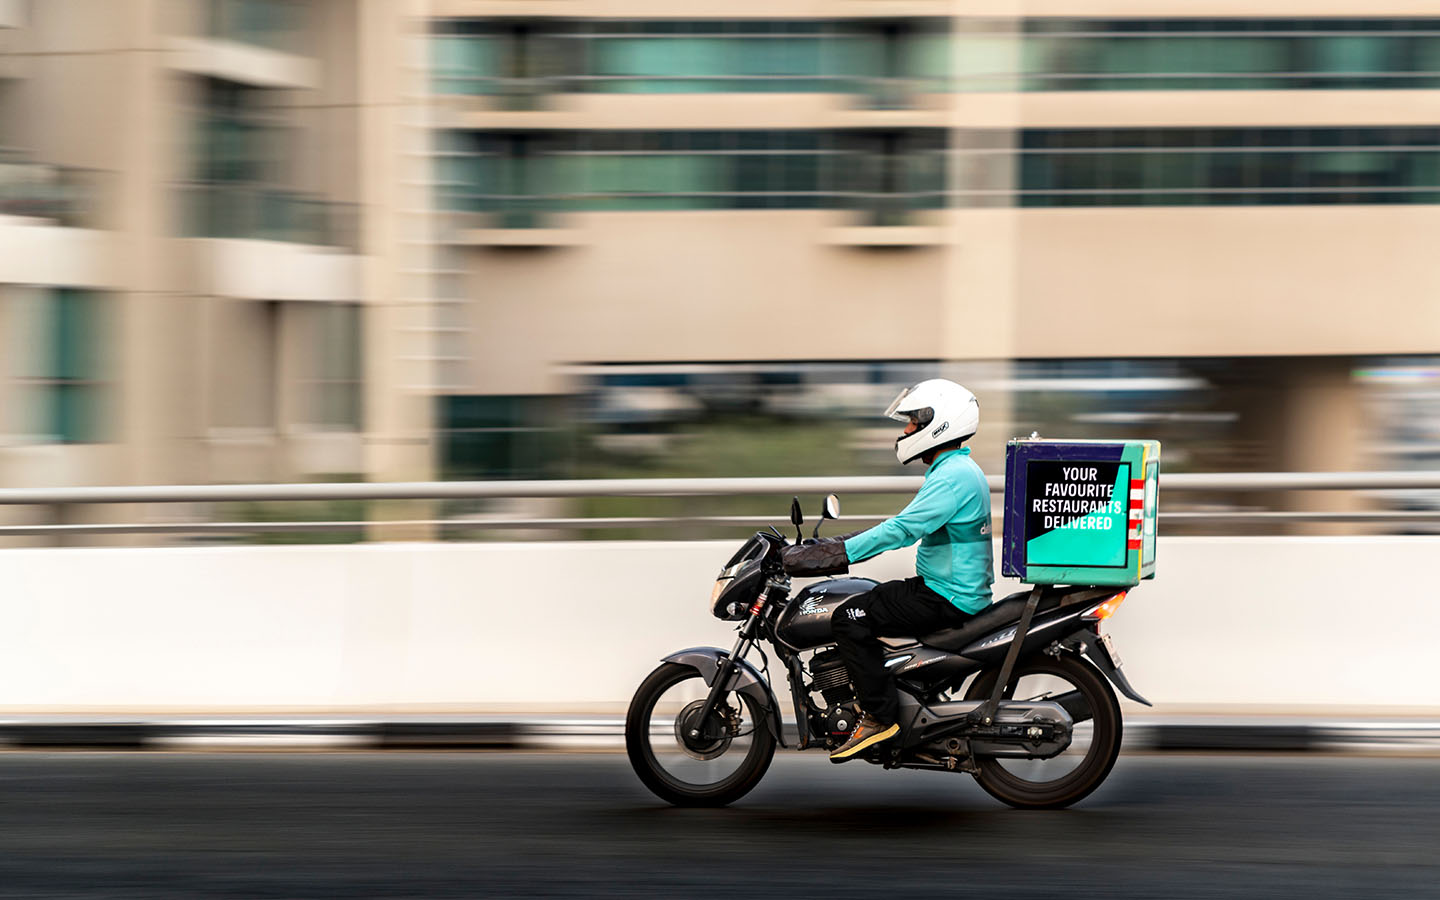 the Delivery Riders Hub in abu dhabi is a collaboration between DMT, non-profit organisations and private sector